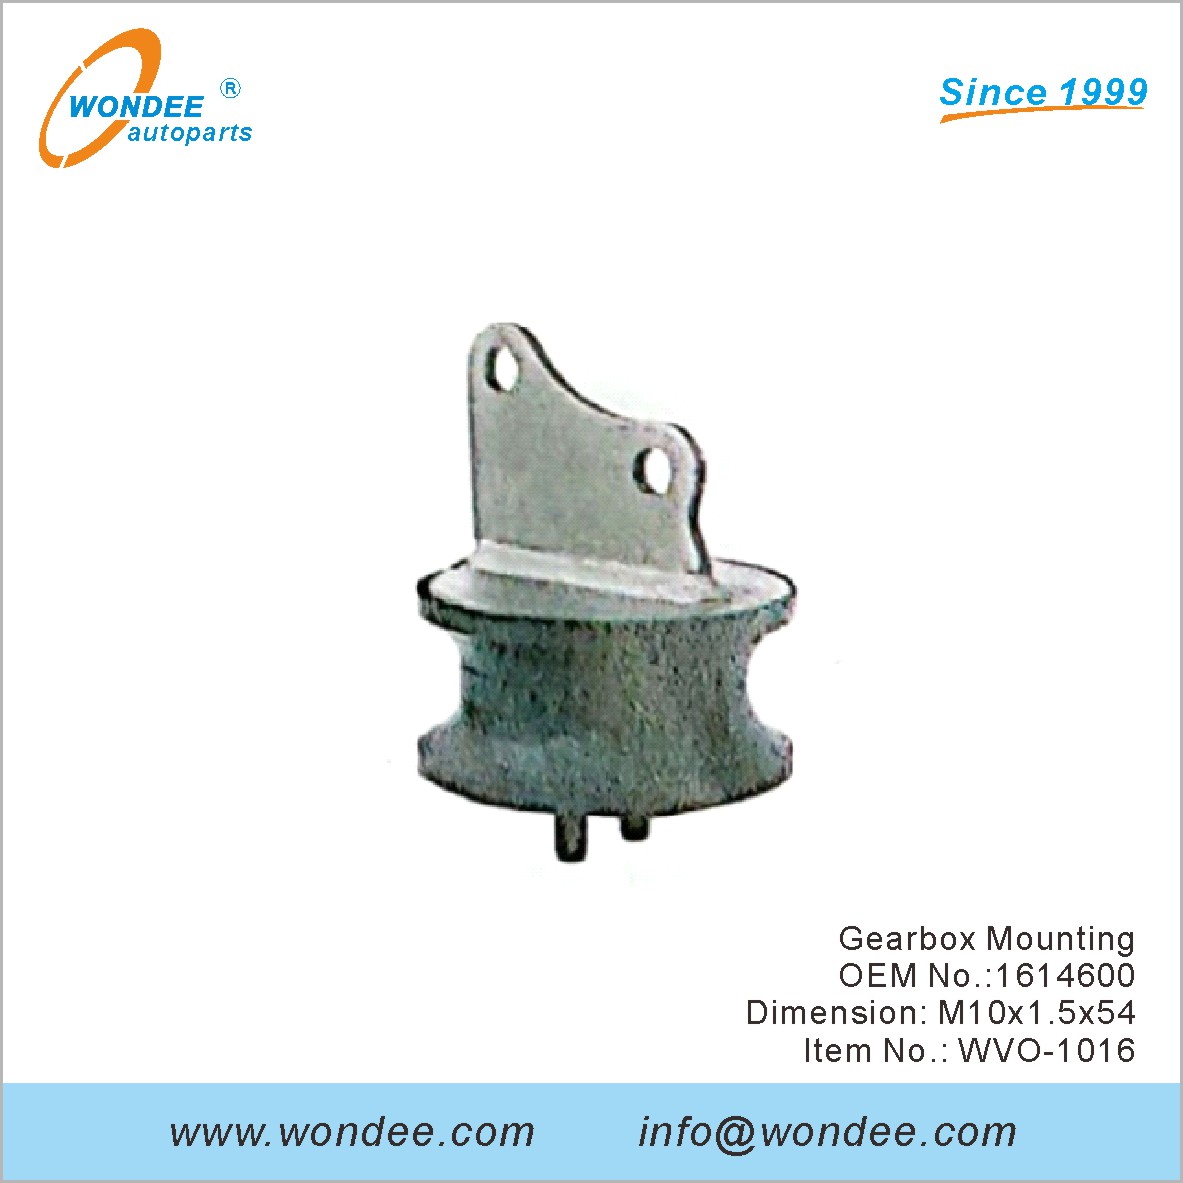 Gearbox Mounting OEM 1614600 for Volvo from WONDEE